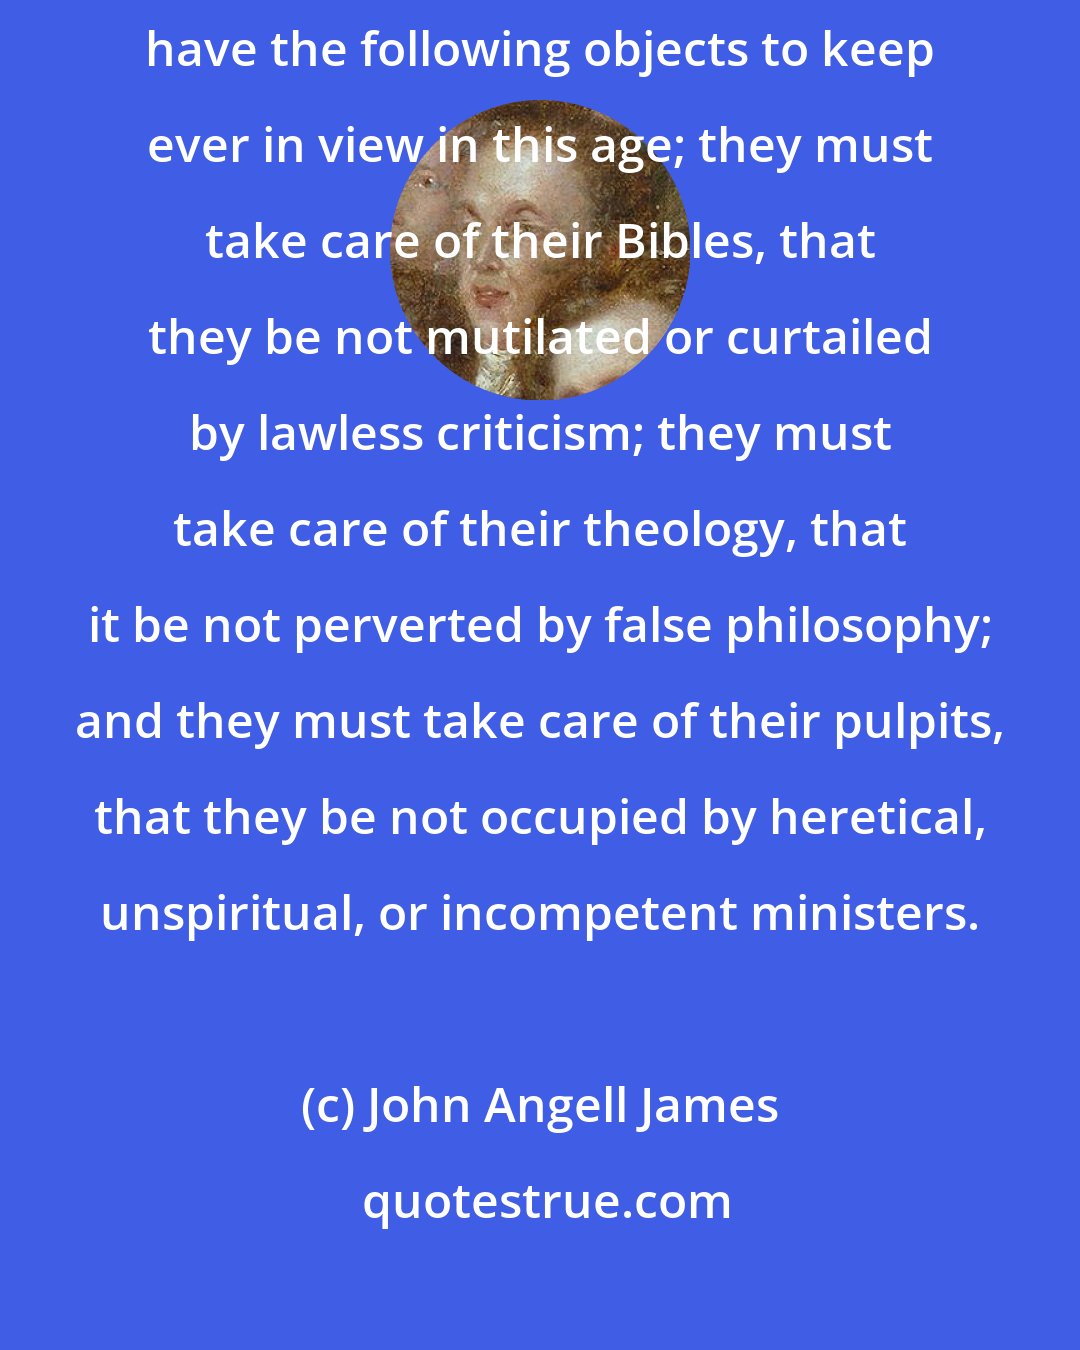 John Angell James: The friends of evangelical doctrine, and the advocates of orthodoxy, have the following objects to keep ever in view in this age; they must take care of their Bibles, that they be not mutilated or curtailed by lawless criticism; they must take care of their theology, that it be not perverted by false philosophy; and they must take care of their pulpits, that they be not occupied by heretical, unspiritual, or incompetent ministers.